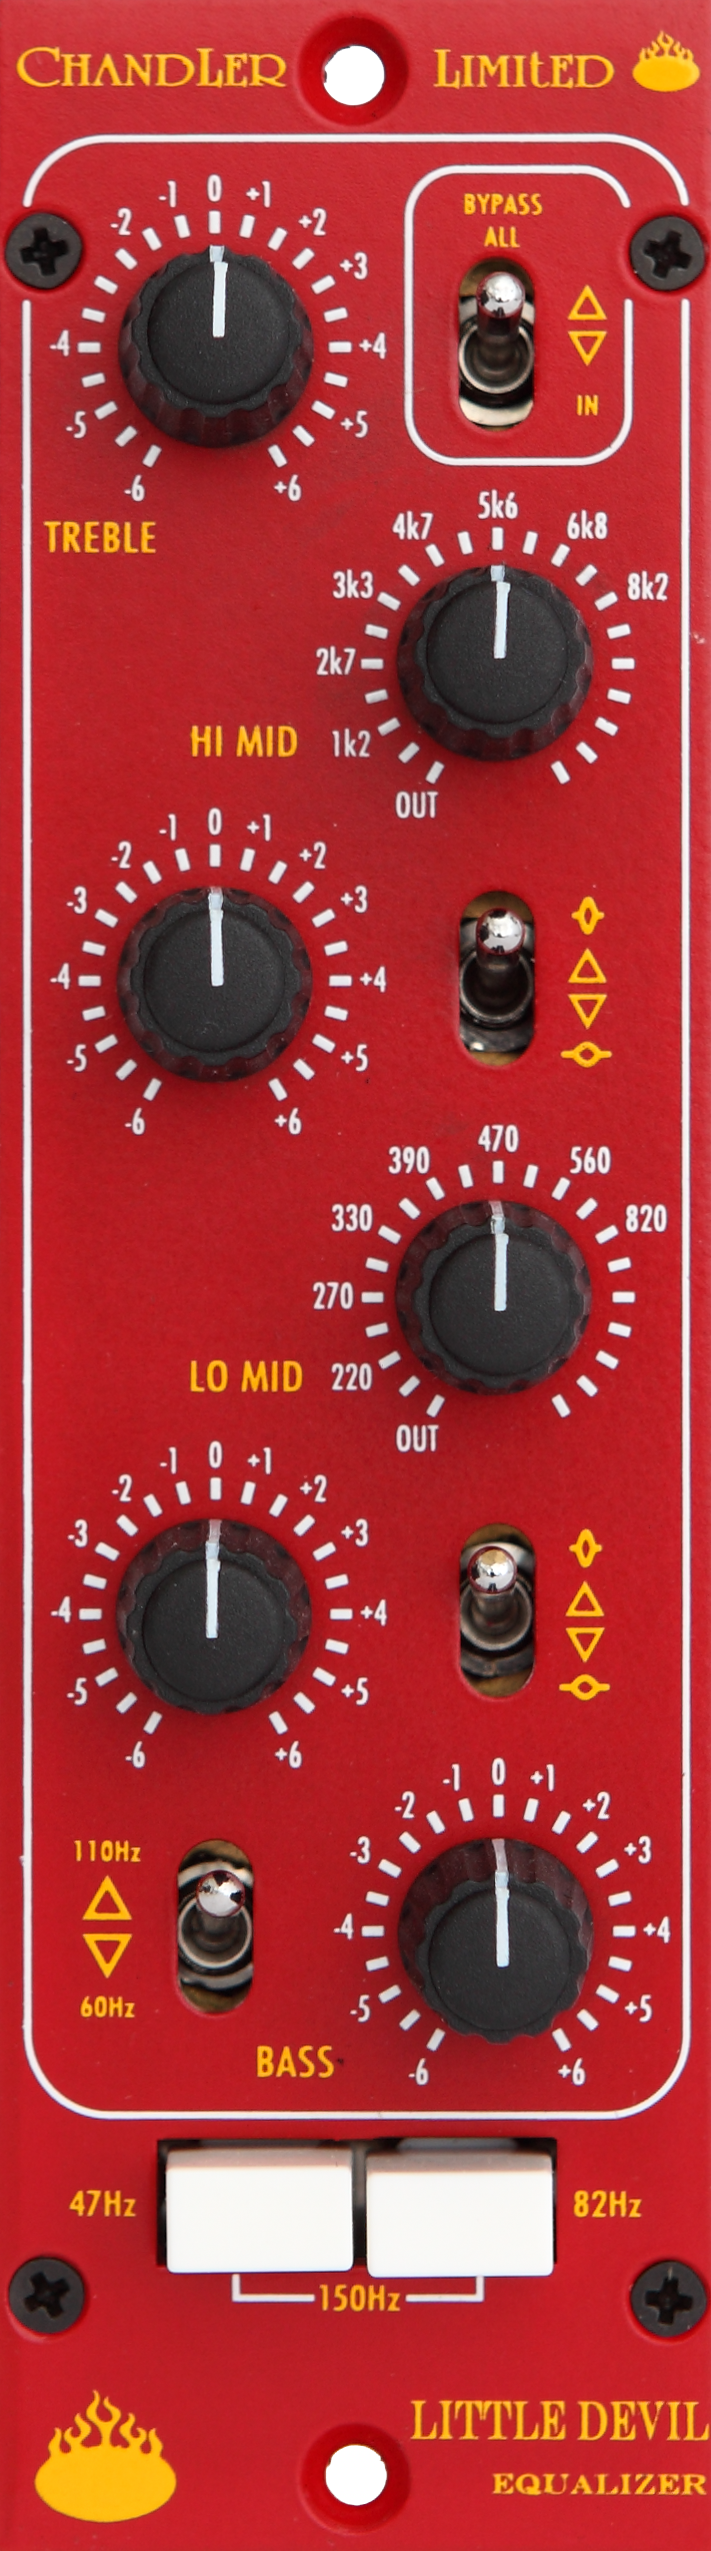 New Chandler Limited Little Devil EQ 500-Series 4-band Parametric Equalizer Module